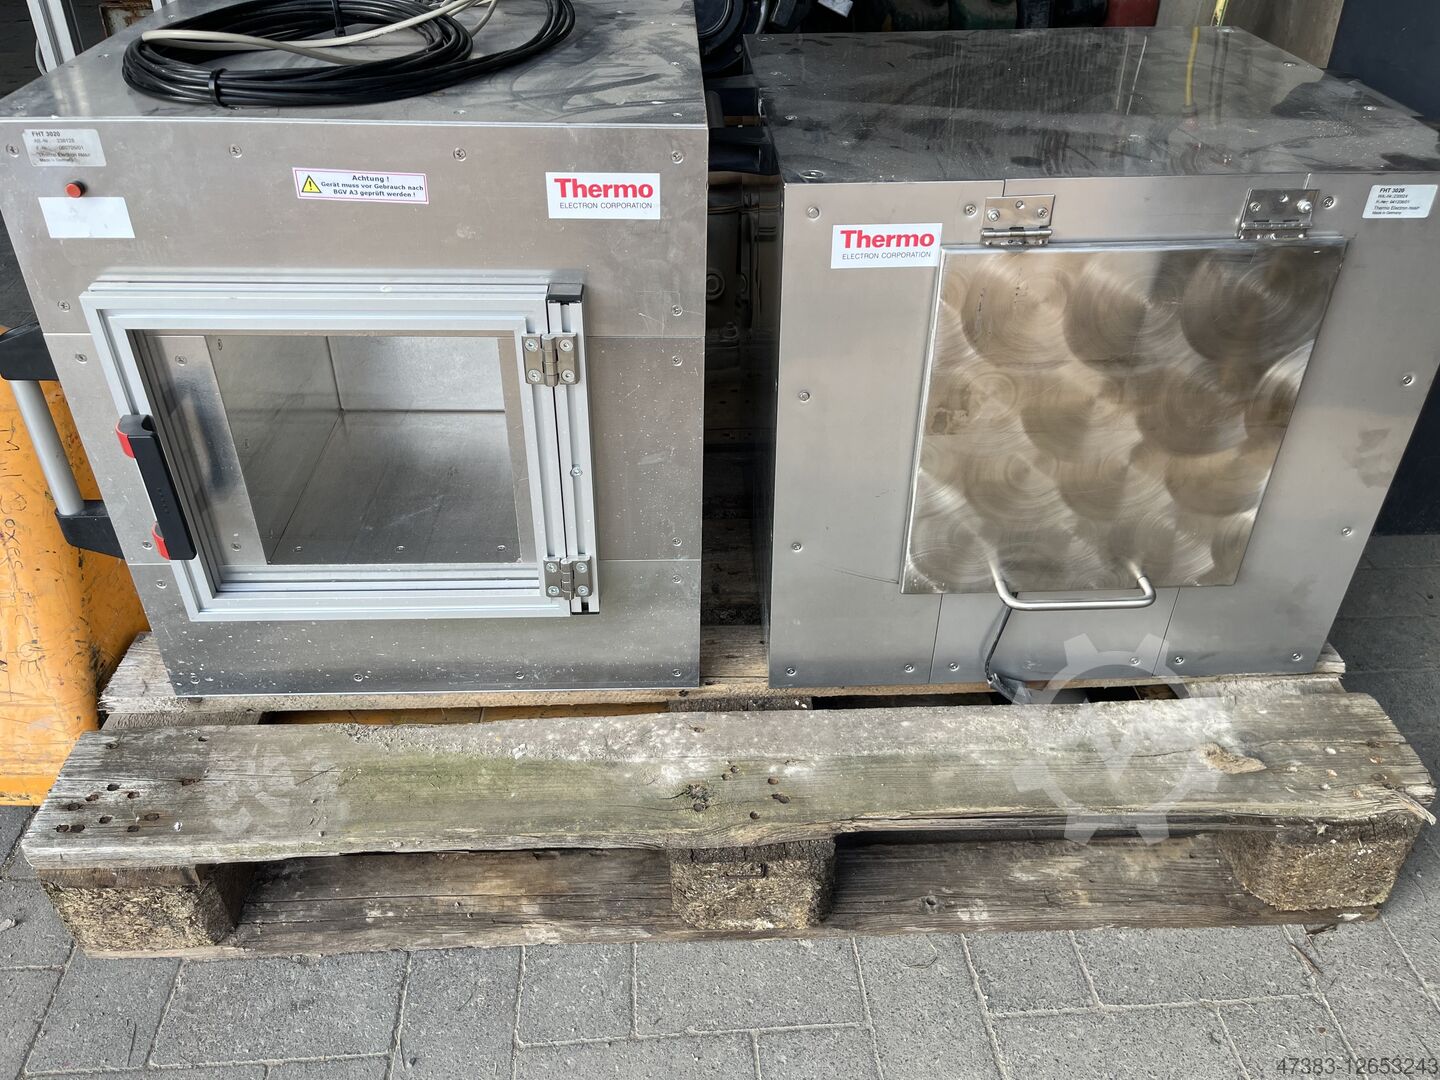 Thermo FHT 3020 ESM FHT 8000 buy used - Offer on Werktuigen - Price: €1,690